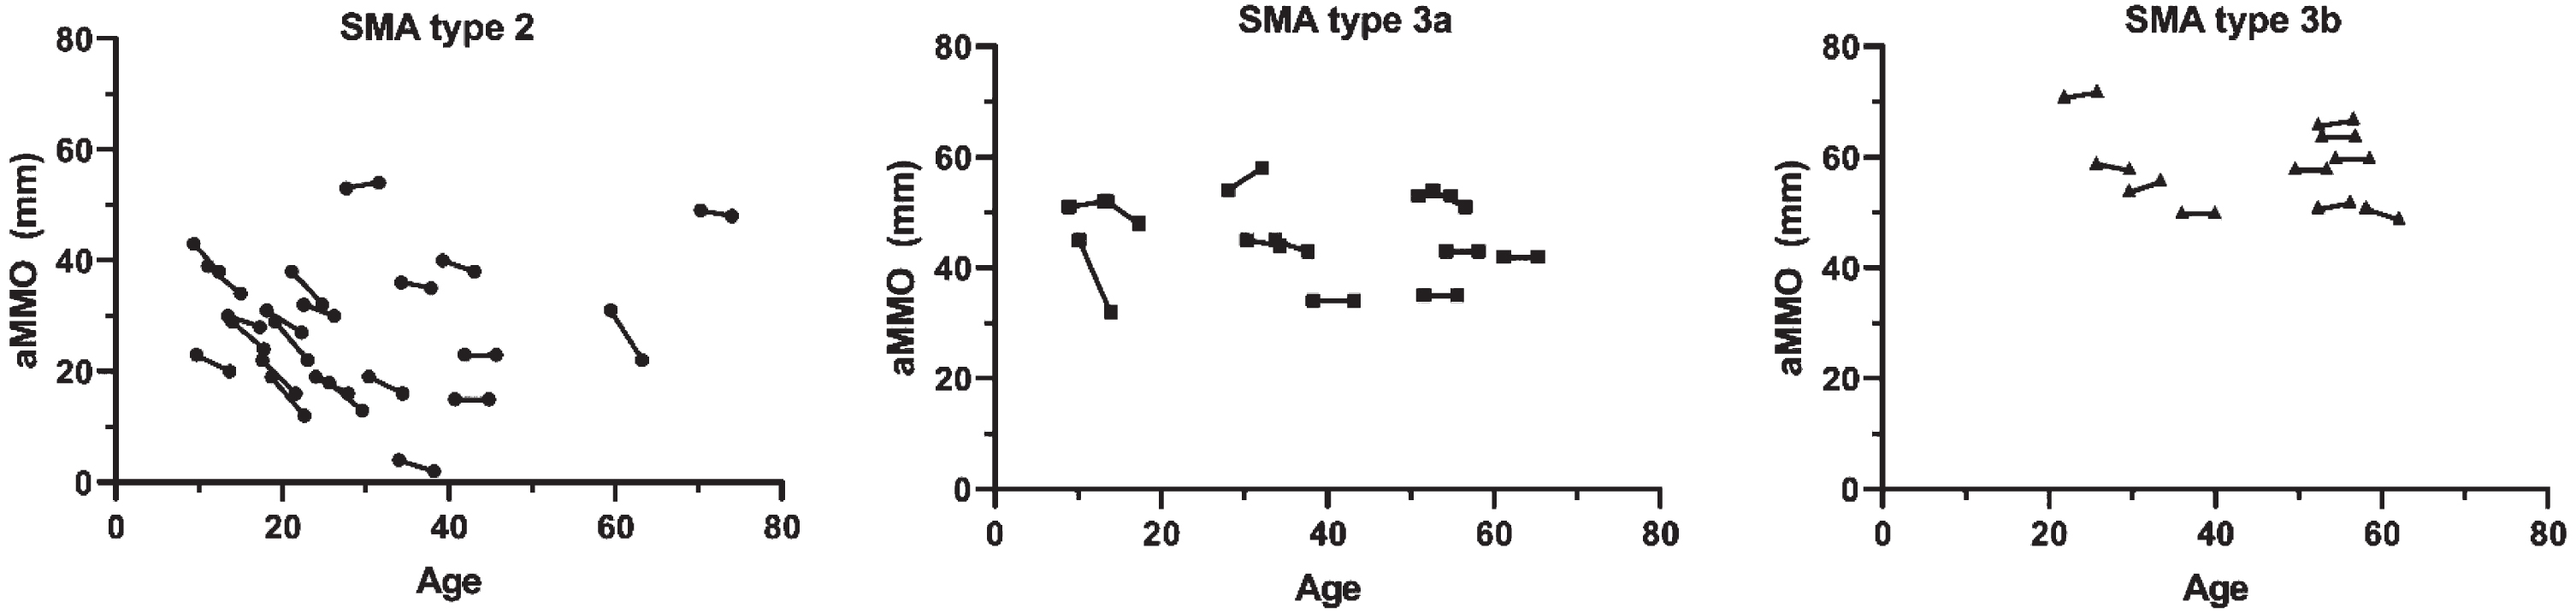 Correlation between age and active mouth opening in patients with SMA type 2, 3a and 3b. Active maximum mouth opening (AMMO) measured in mm is significantly decreased at follow-up in patients with SMA type 2, but not SMA types 3a and 3b.